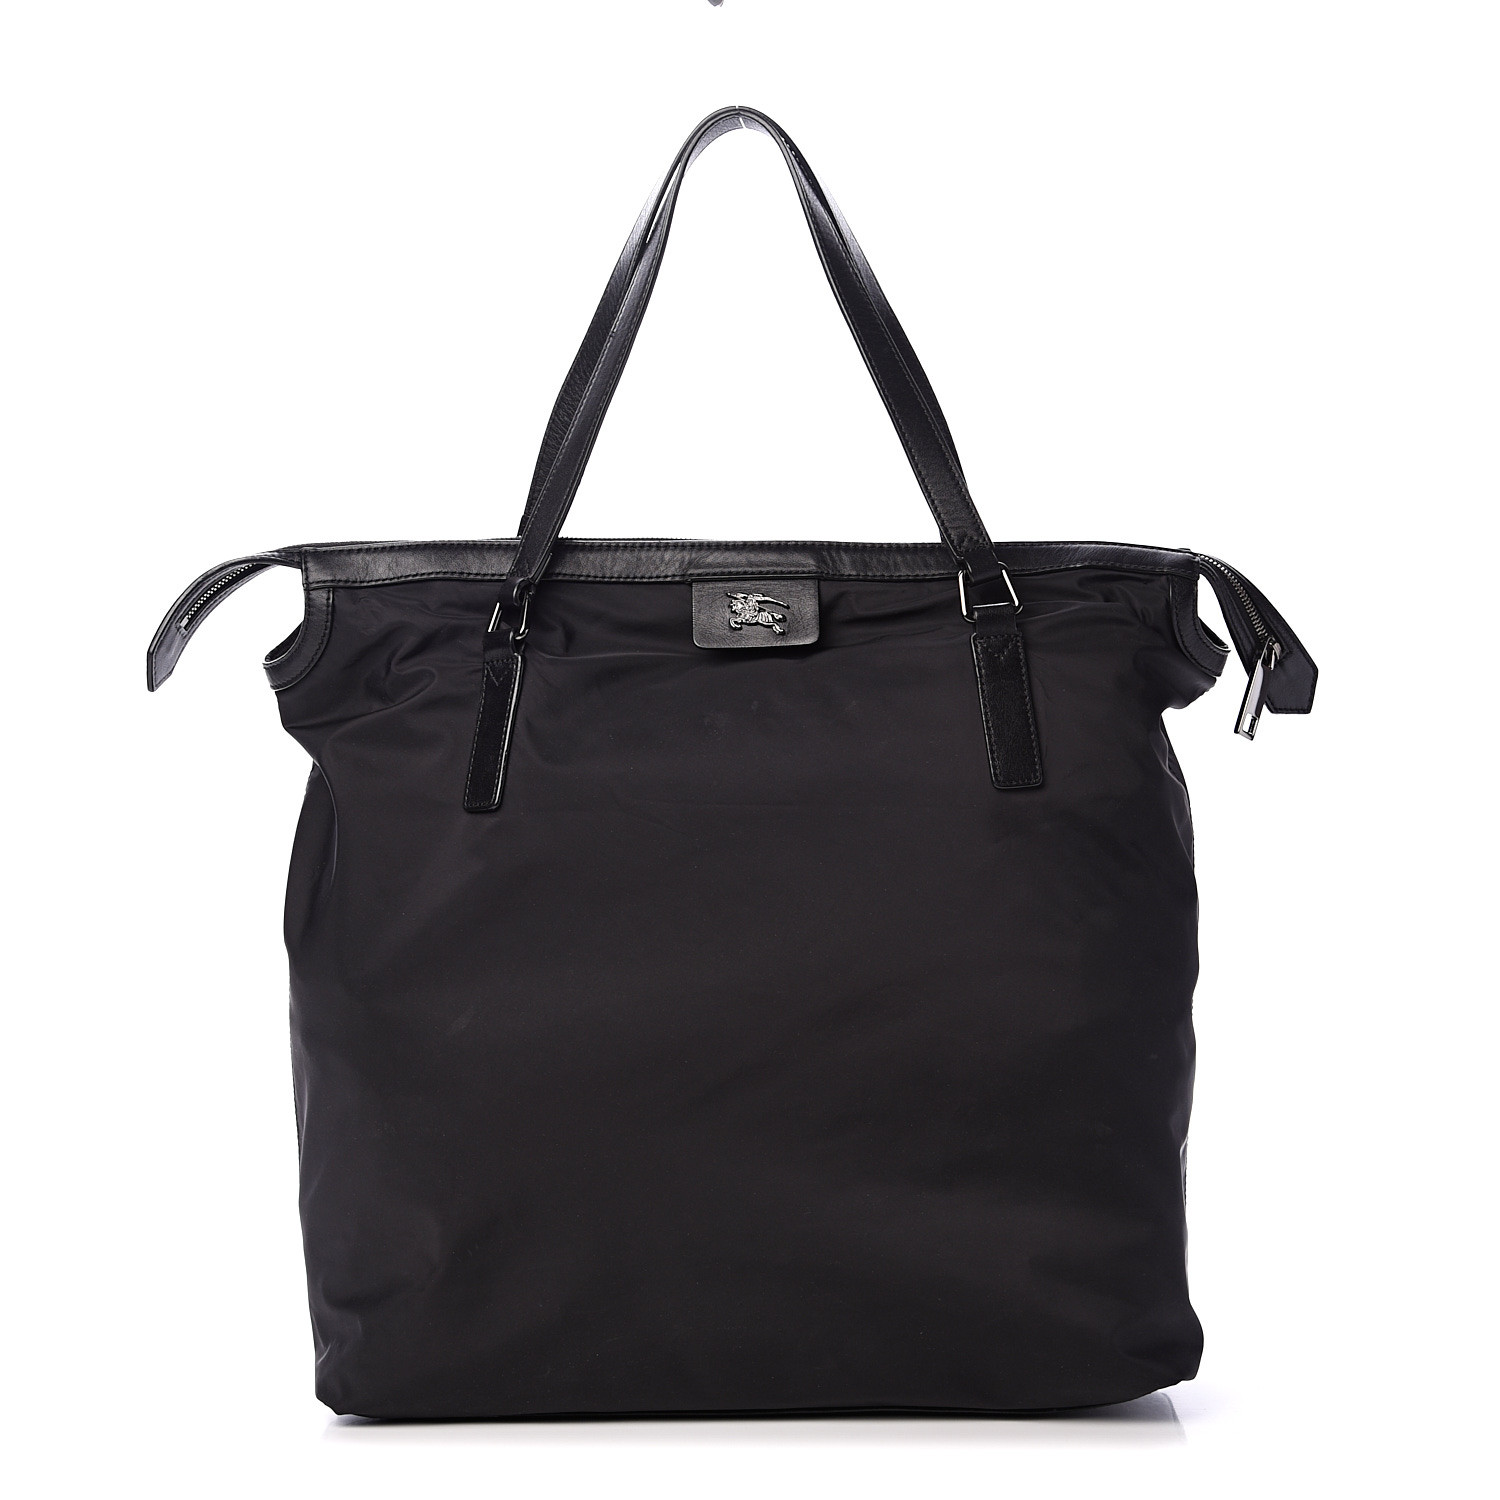 BURBERRY Nylon Buckleigh Packable Tote Black 553132